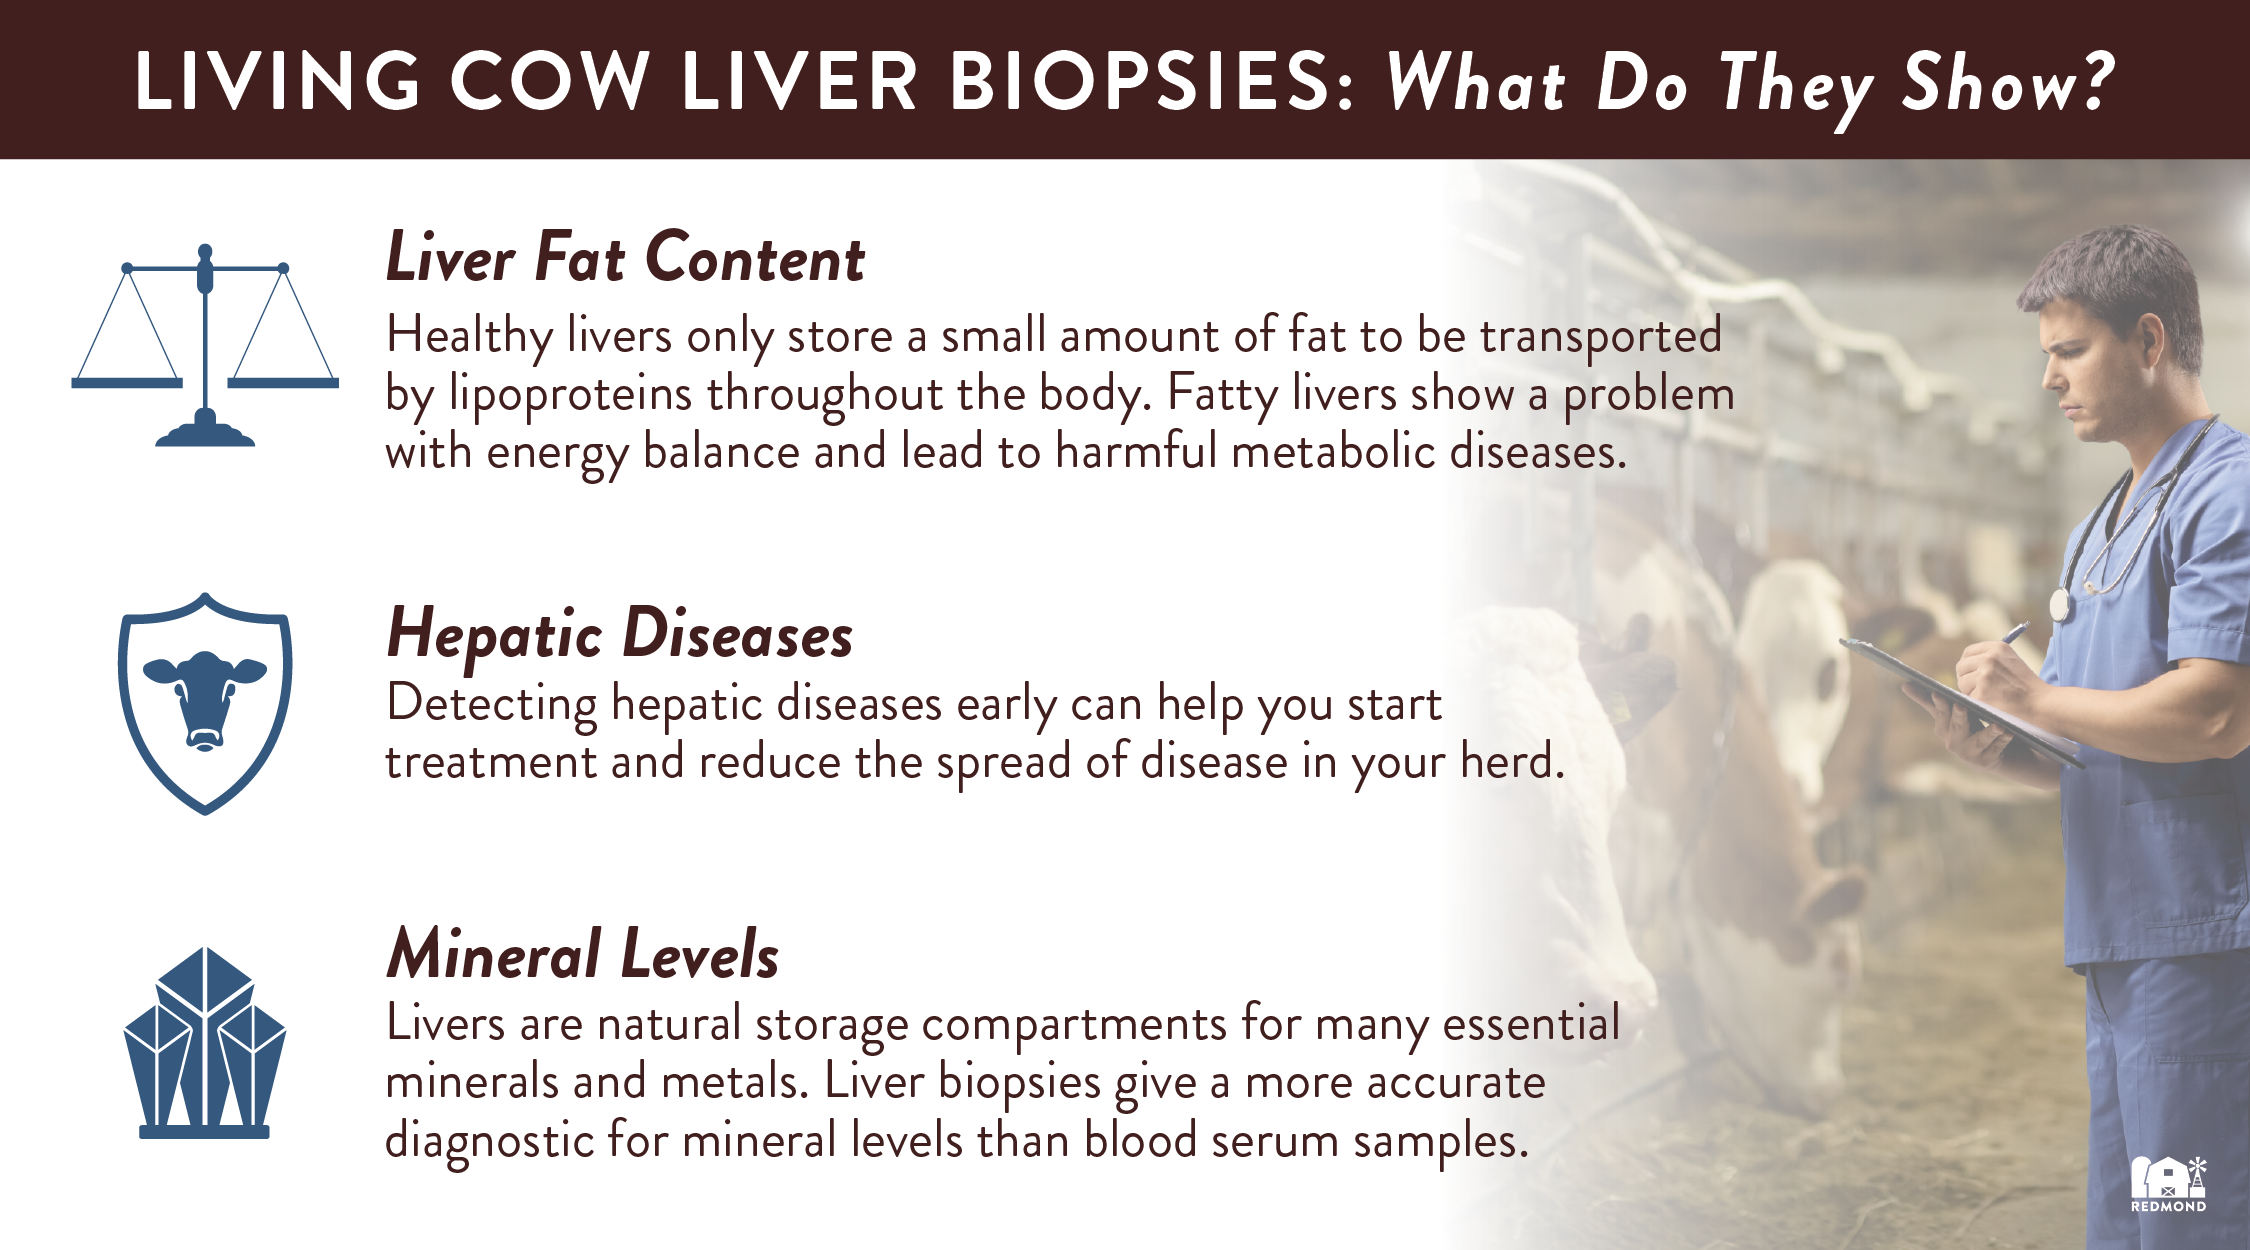 Living Cow Liver Biopsy